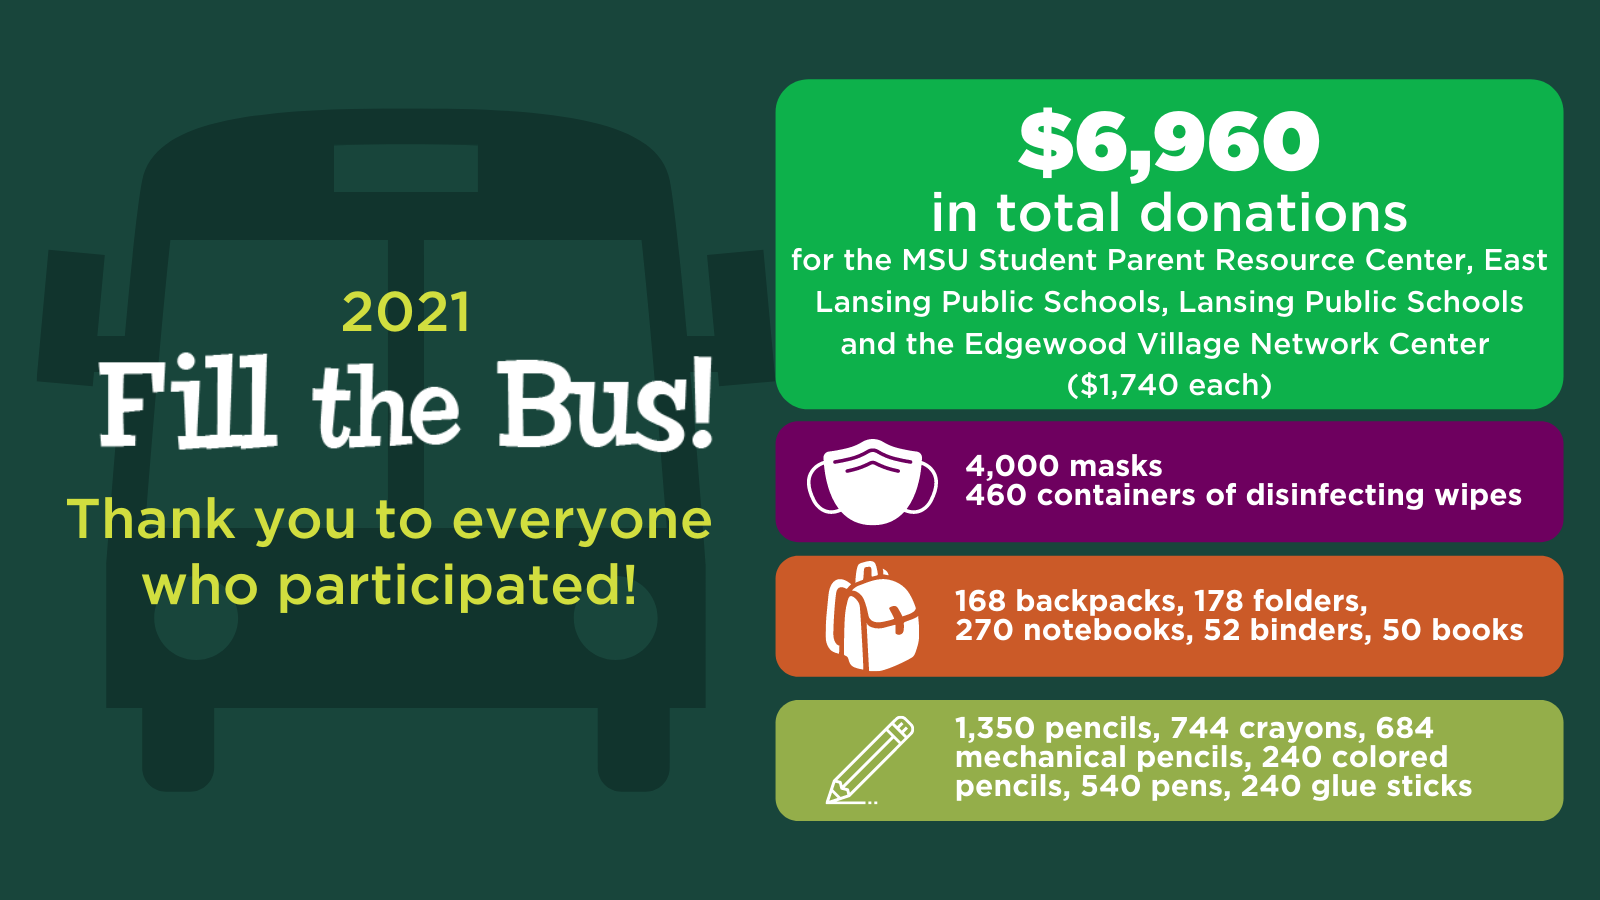 Thank you to everyone who participated in Fill the Bus! 